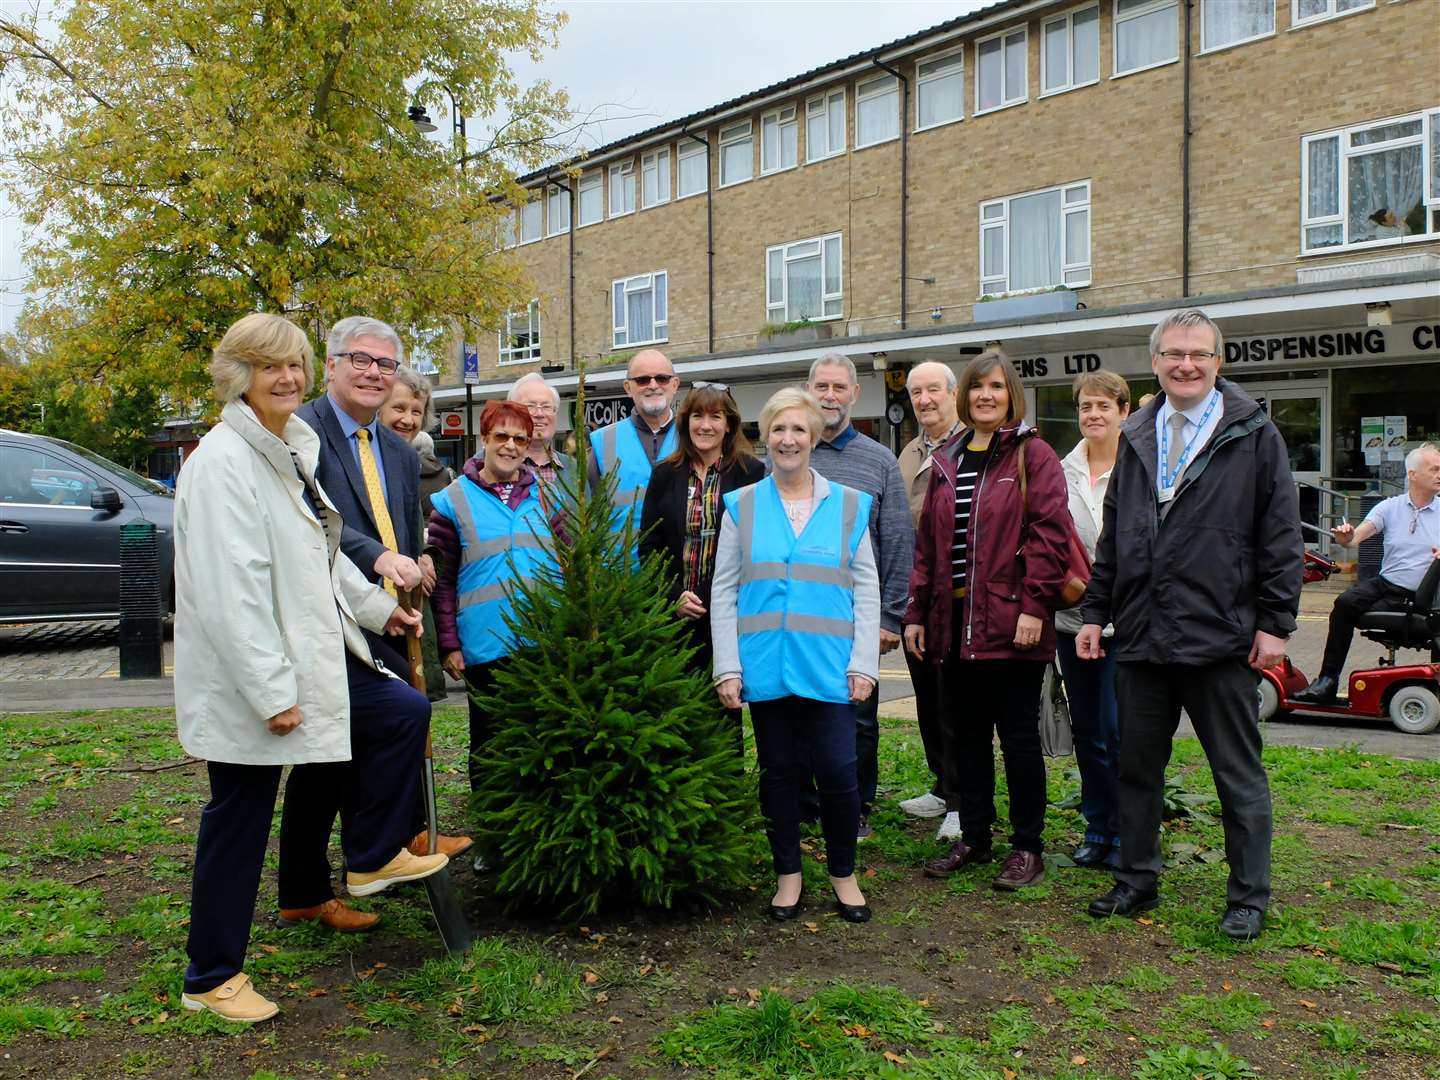 The 5ft Christmas tree donated by Rapport Housing in Martin Square, Larkfield, has been stolen